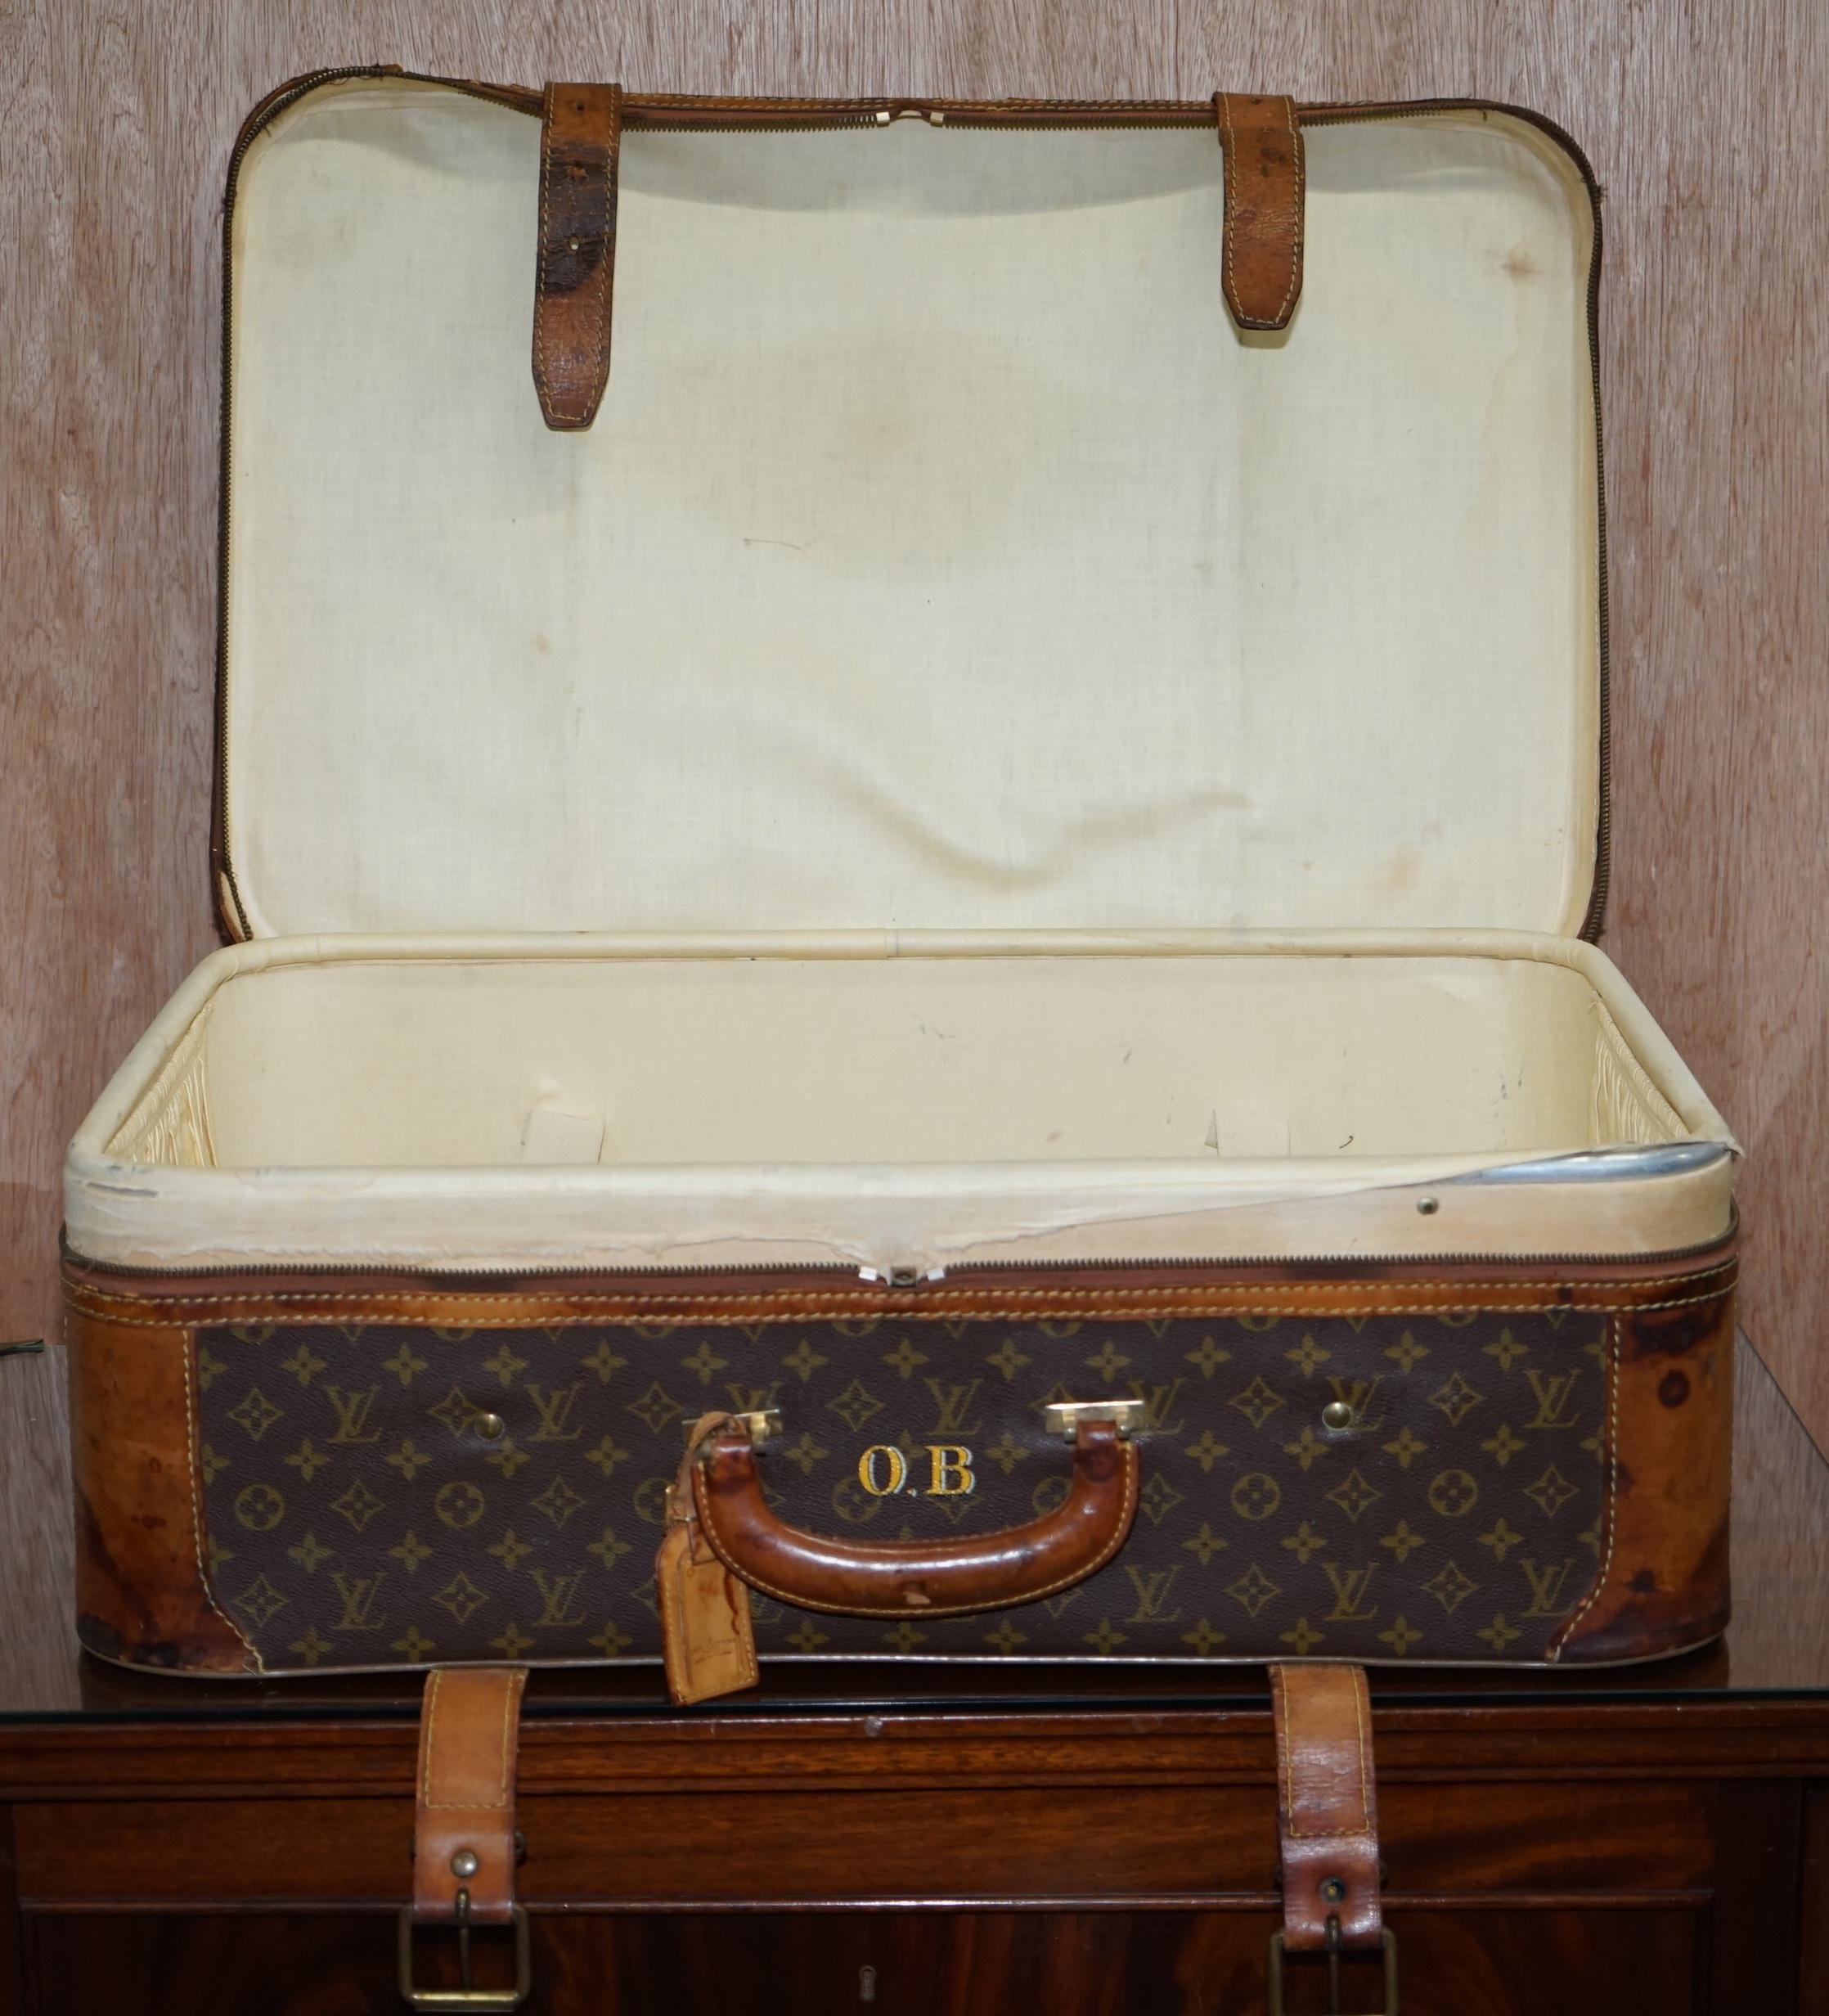 1 of 2 Vintage Brown Leather Louis Vuitton Strapped Bronze Monogram Suitcases 7